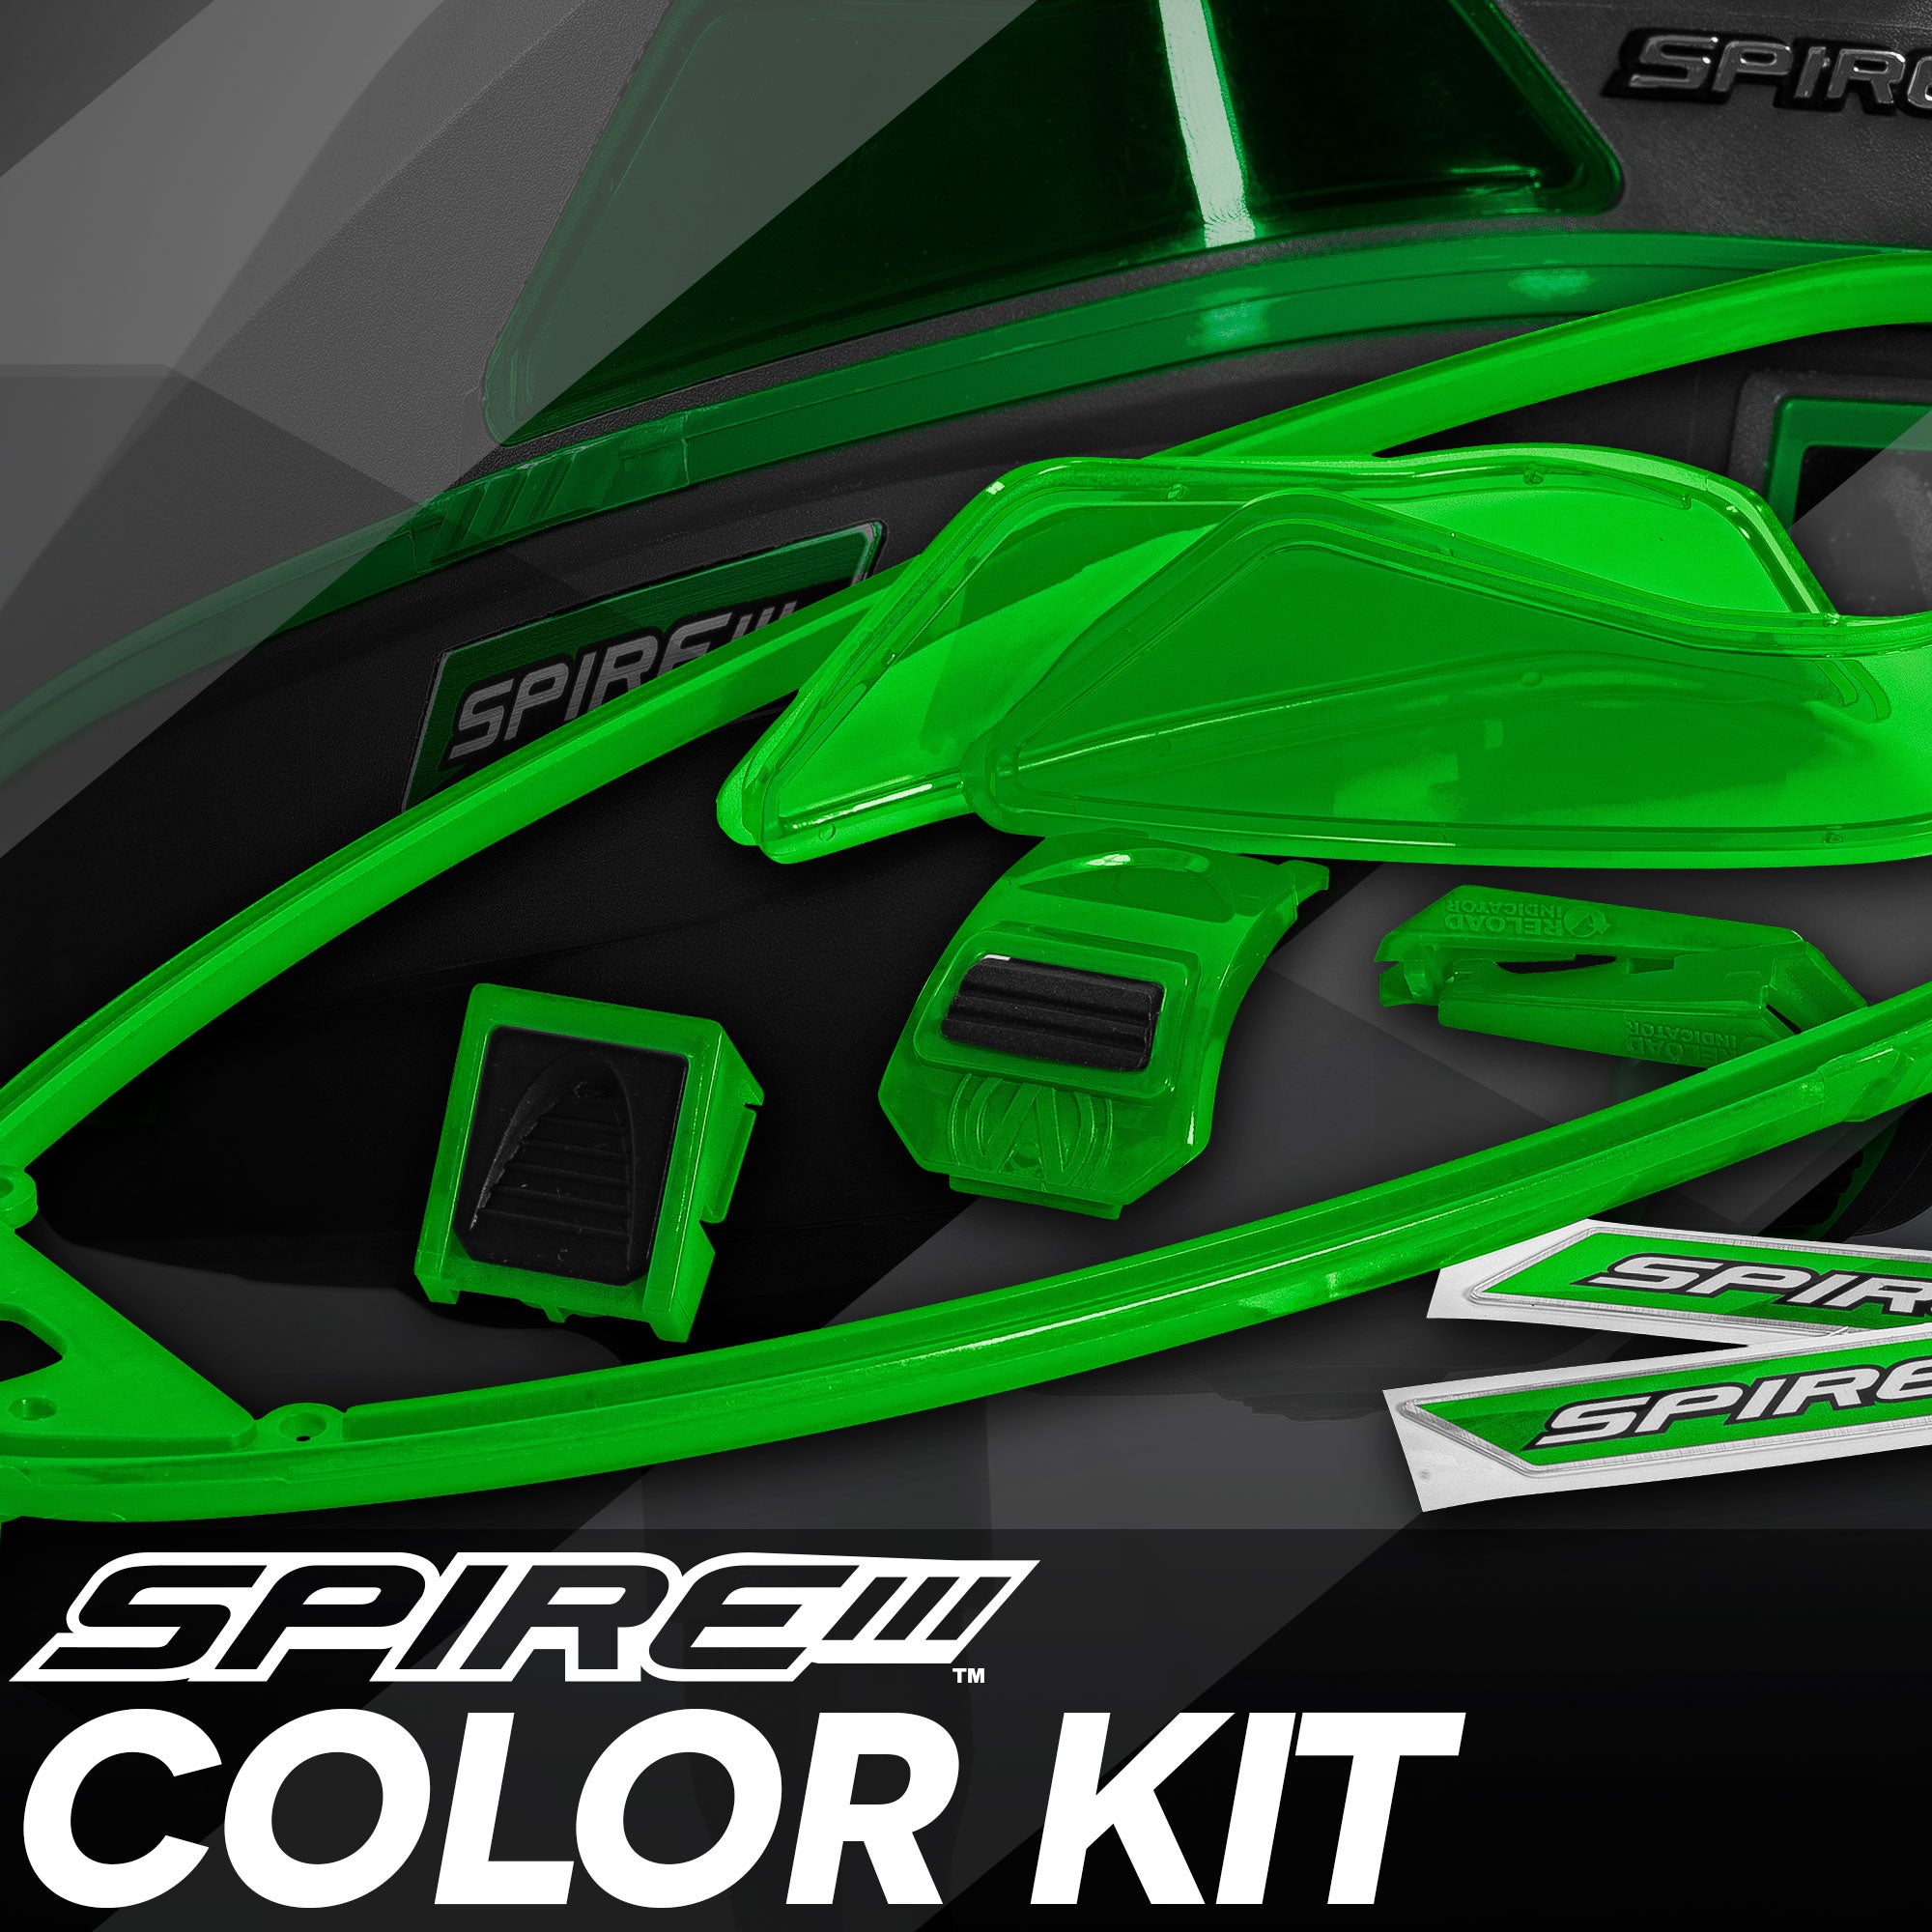 zzz - Virtue Spire III Color Kit - Lime